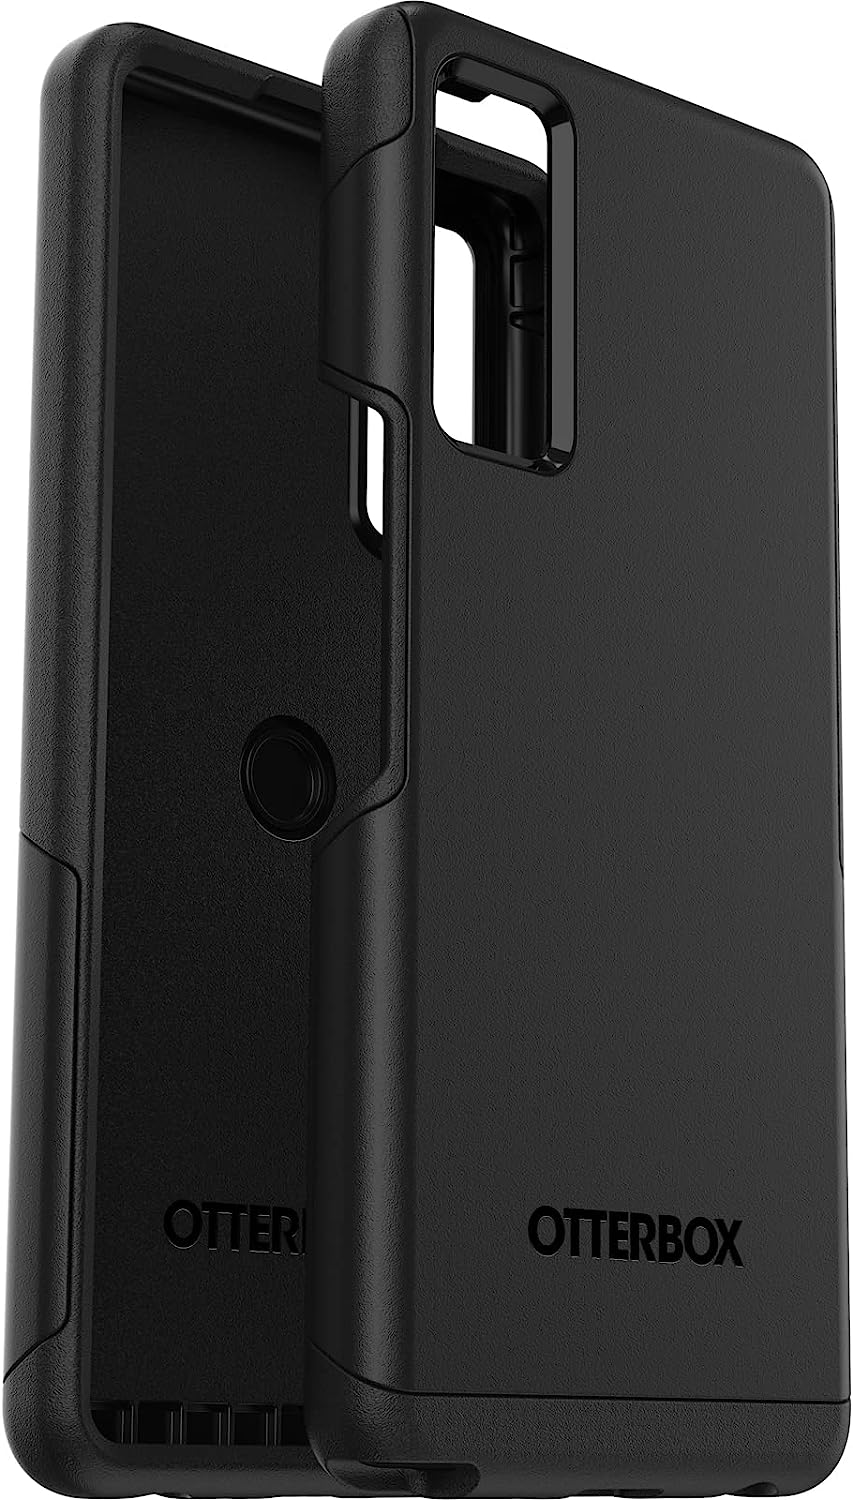 OtterBox COMMUTER LITE Case for TCL Stylus 5G - Black (New)